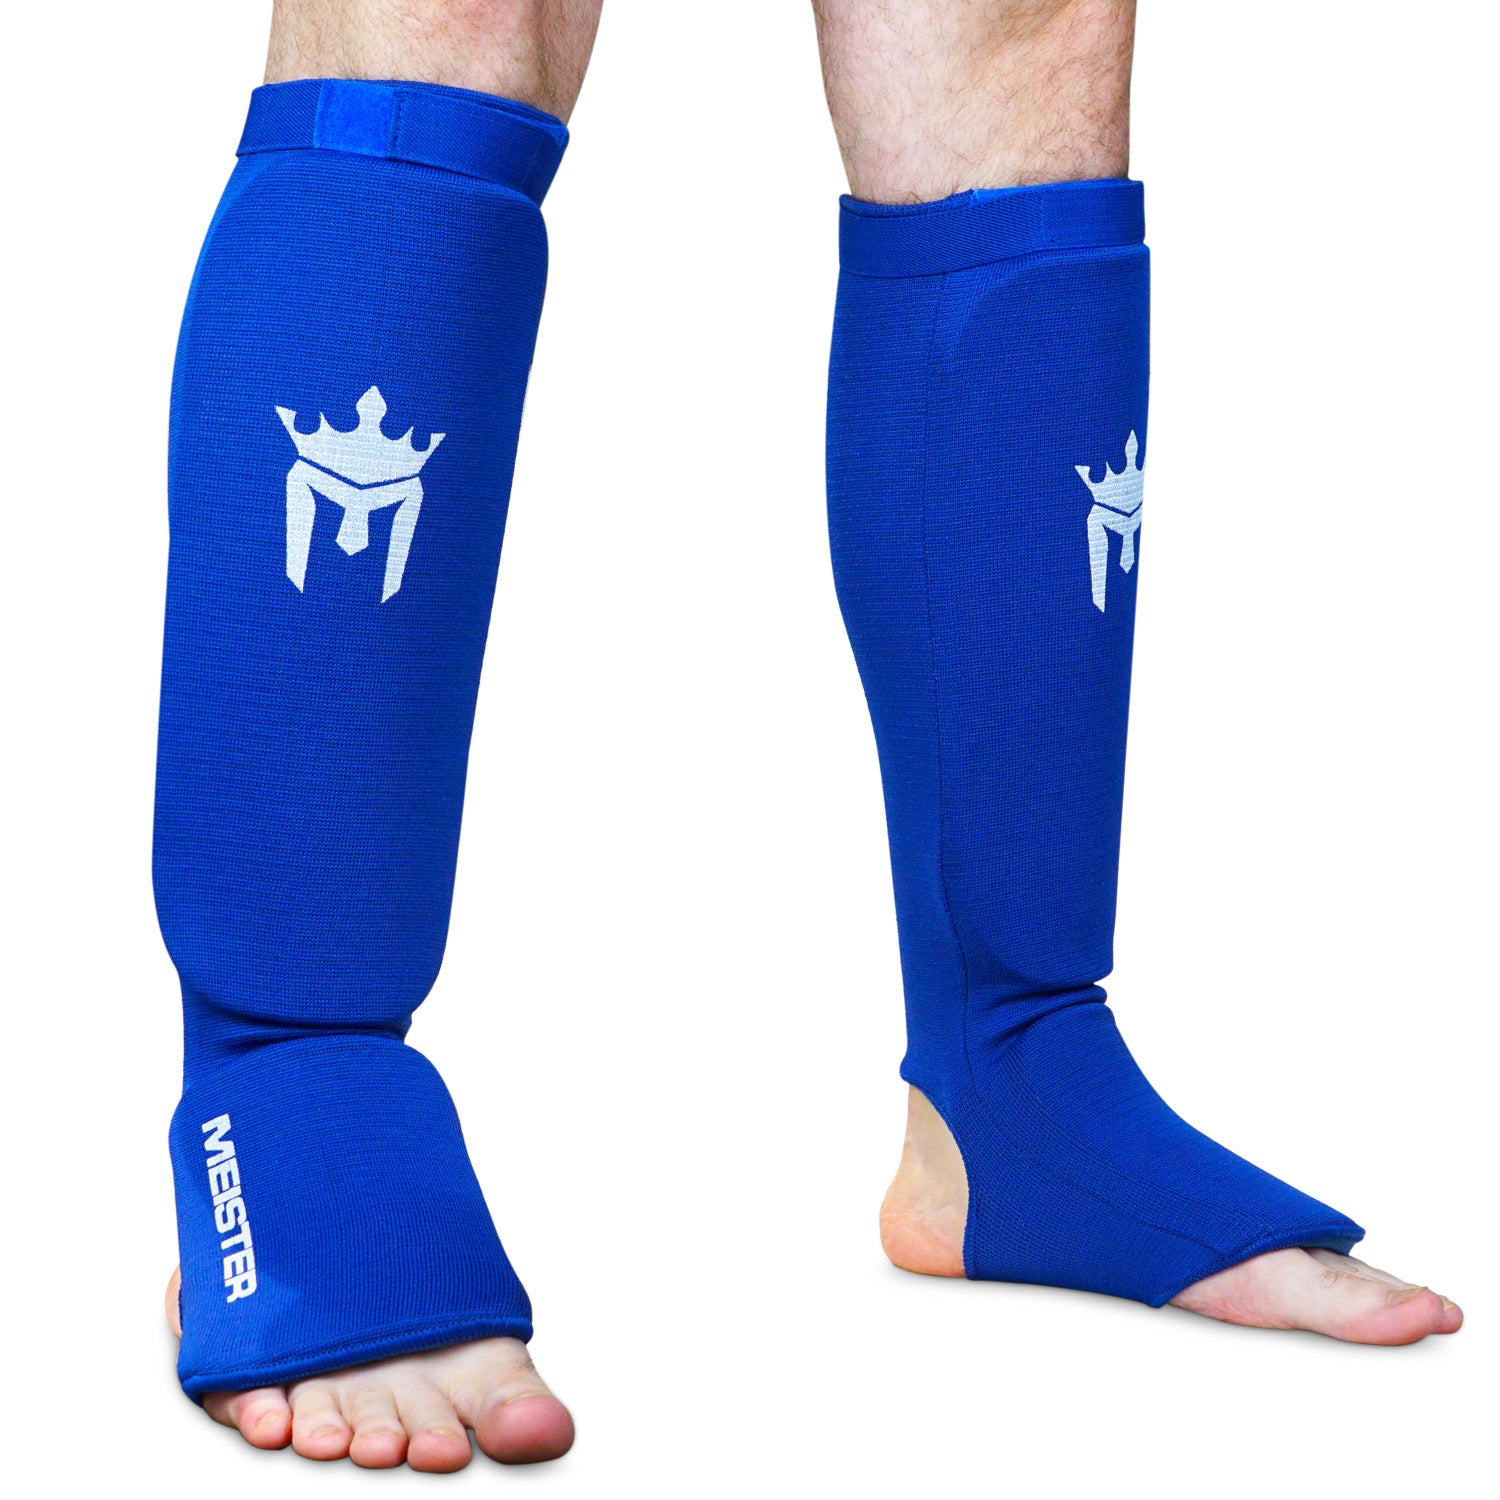 Meister Elastic Cloth Shin & Instep Padded Guards (Pair) - Blue